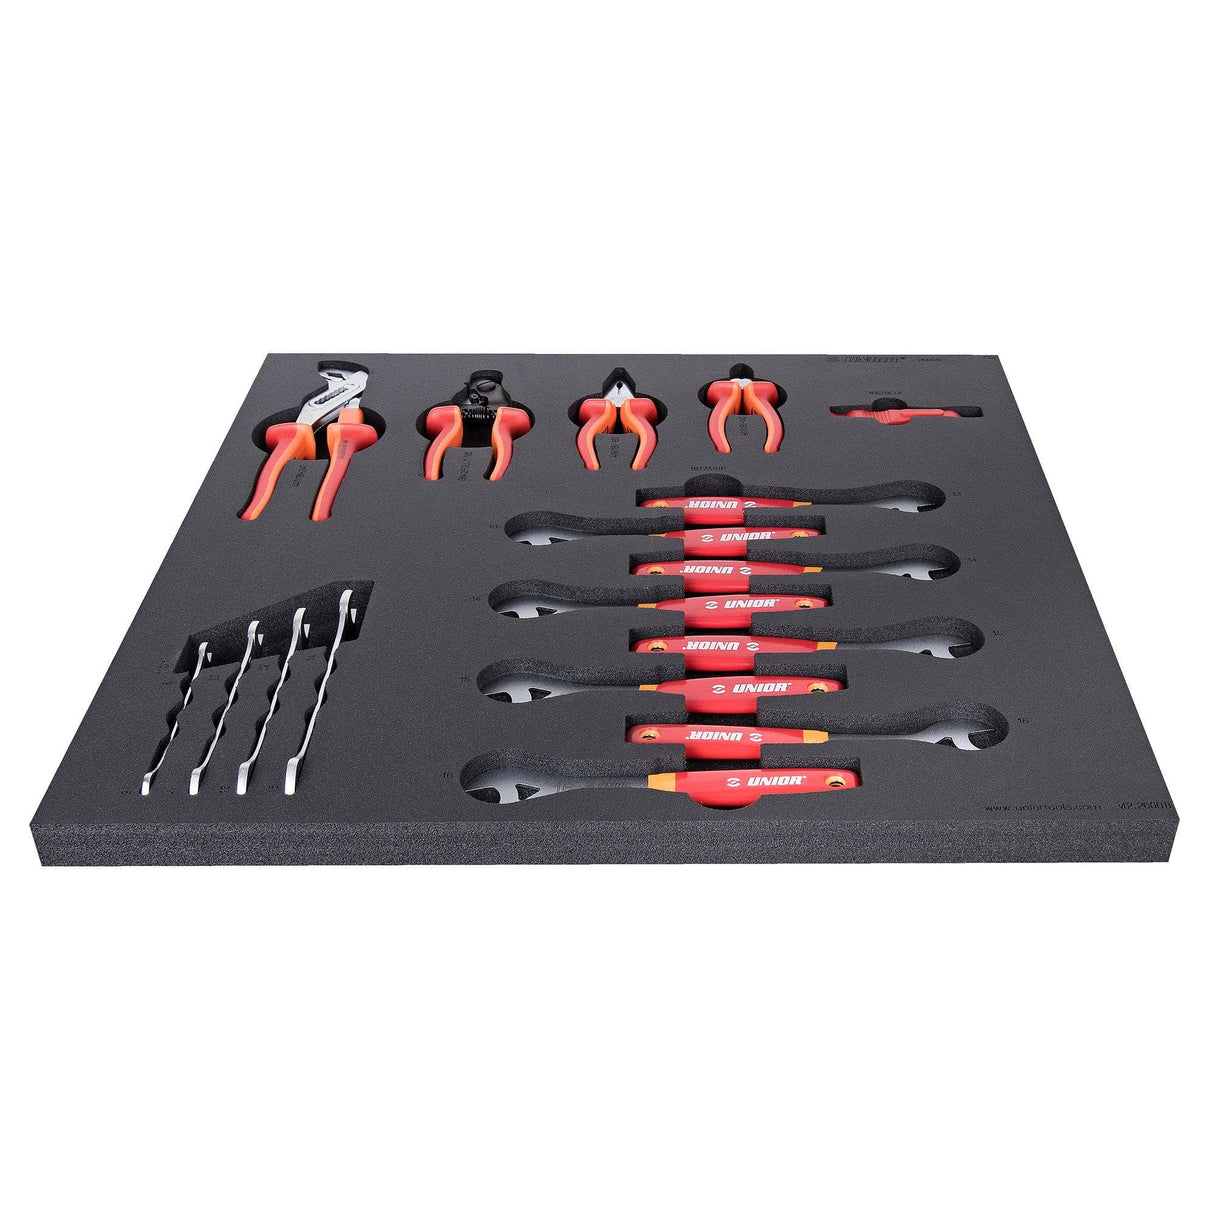 Unior Set Of Tools In Tray 2 For 2600B: Red